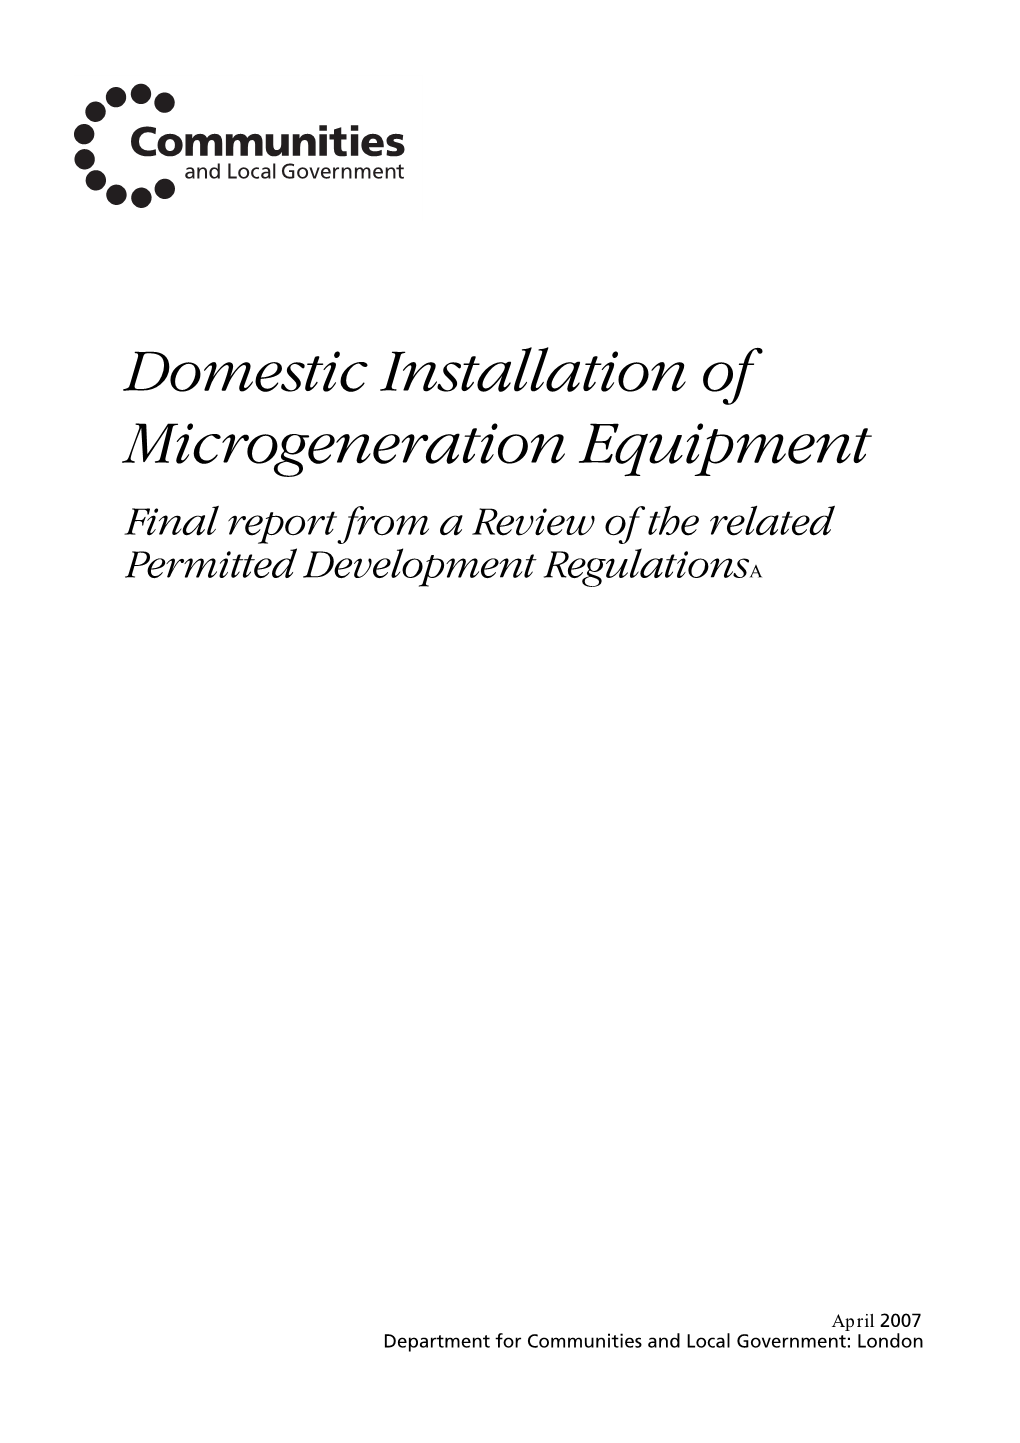 Domestic Installation of Microgeneration Equipment Final Report from a Review of the Related Permitted Development Regulationsa